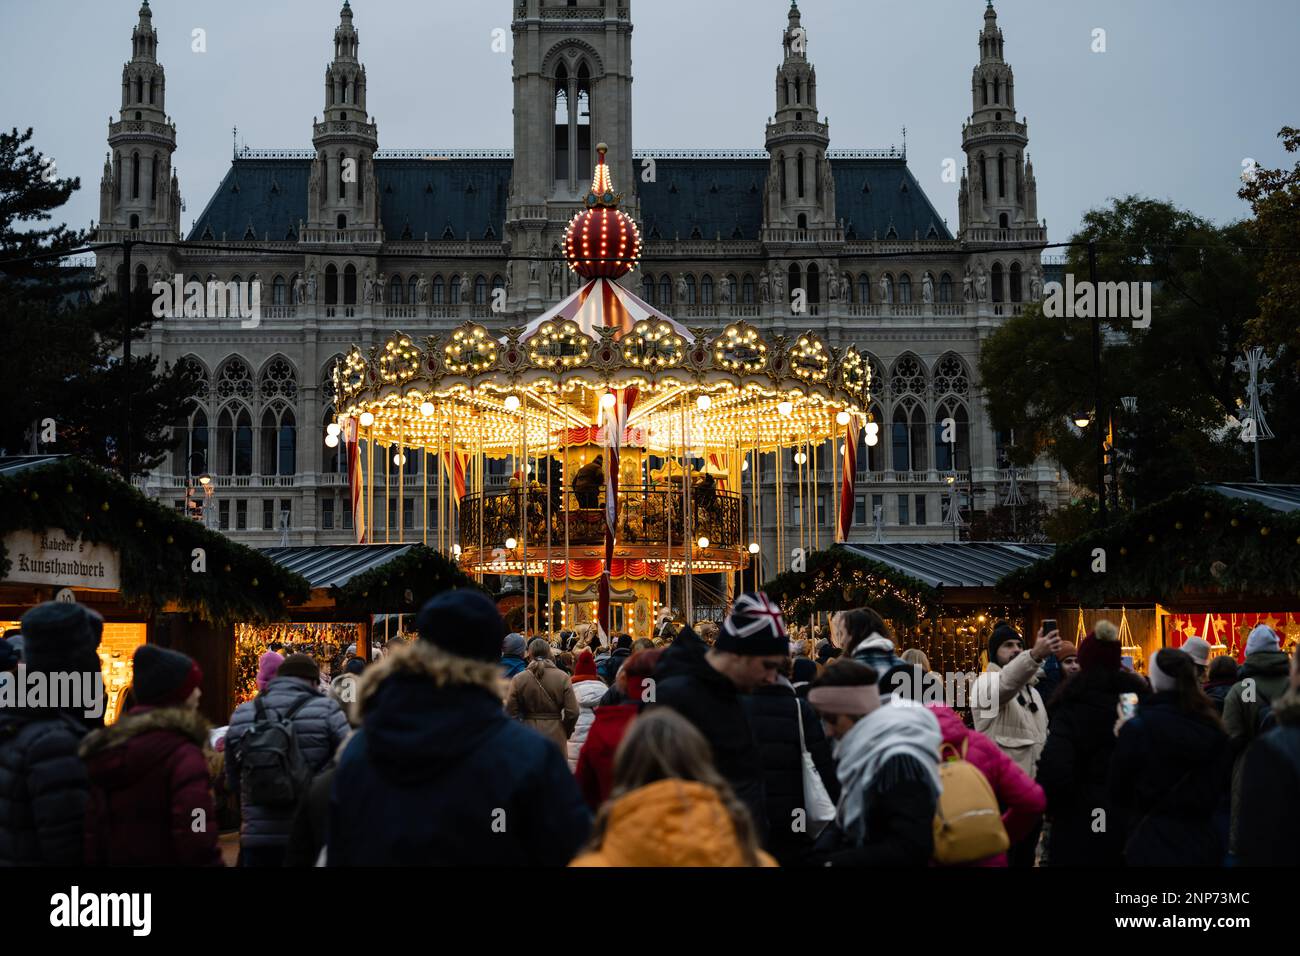 Carousel at the Christmas Market at the Vienna City Hall or Christkindlmarkt beim Rathaus in the Evening Stock Photo